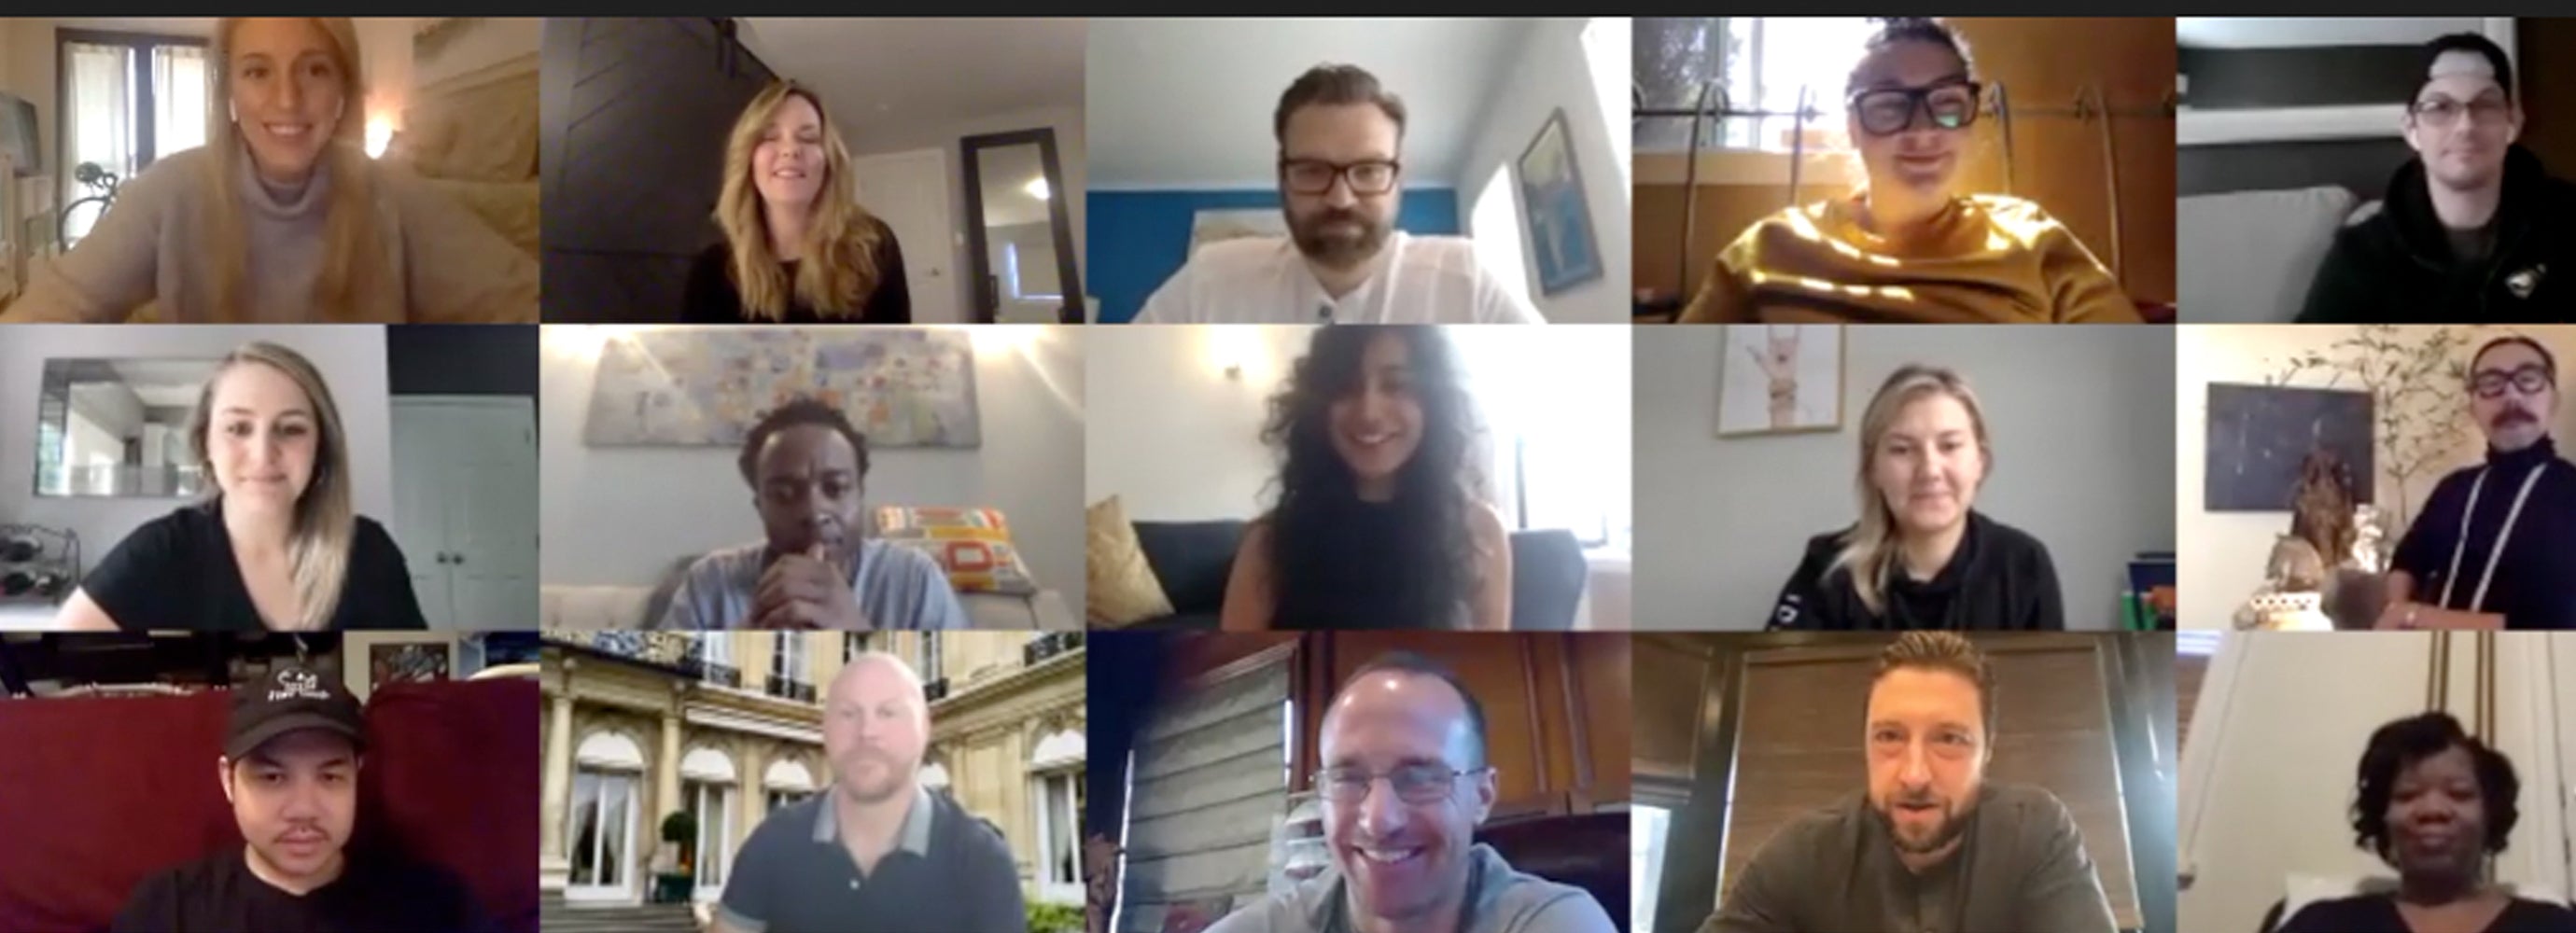 UNTUCKit Corporate team on zoom call